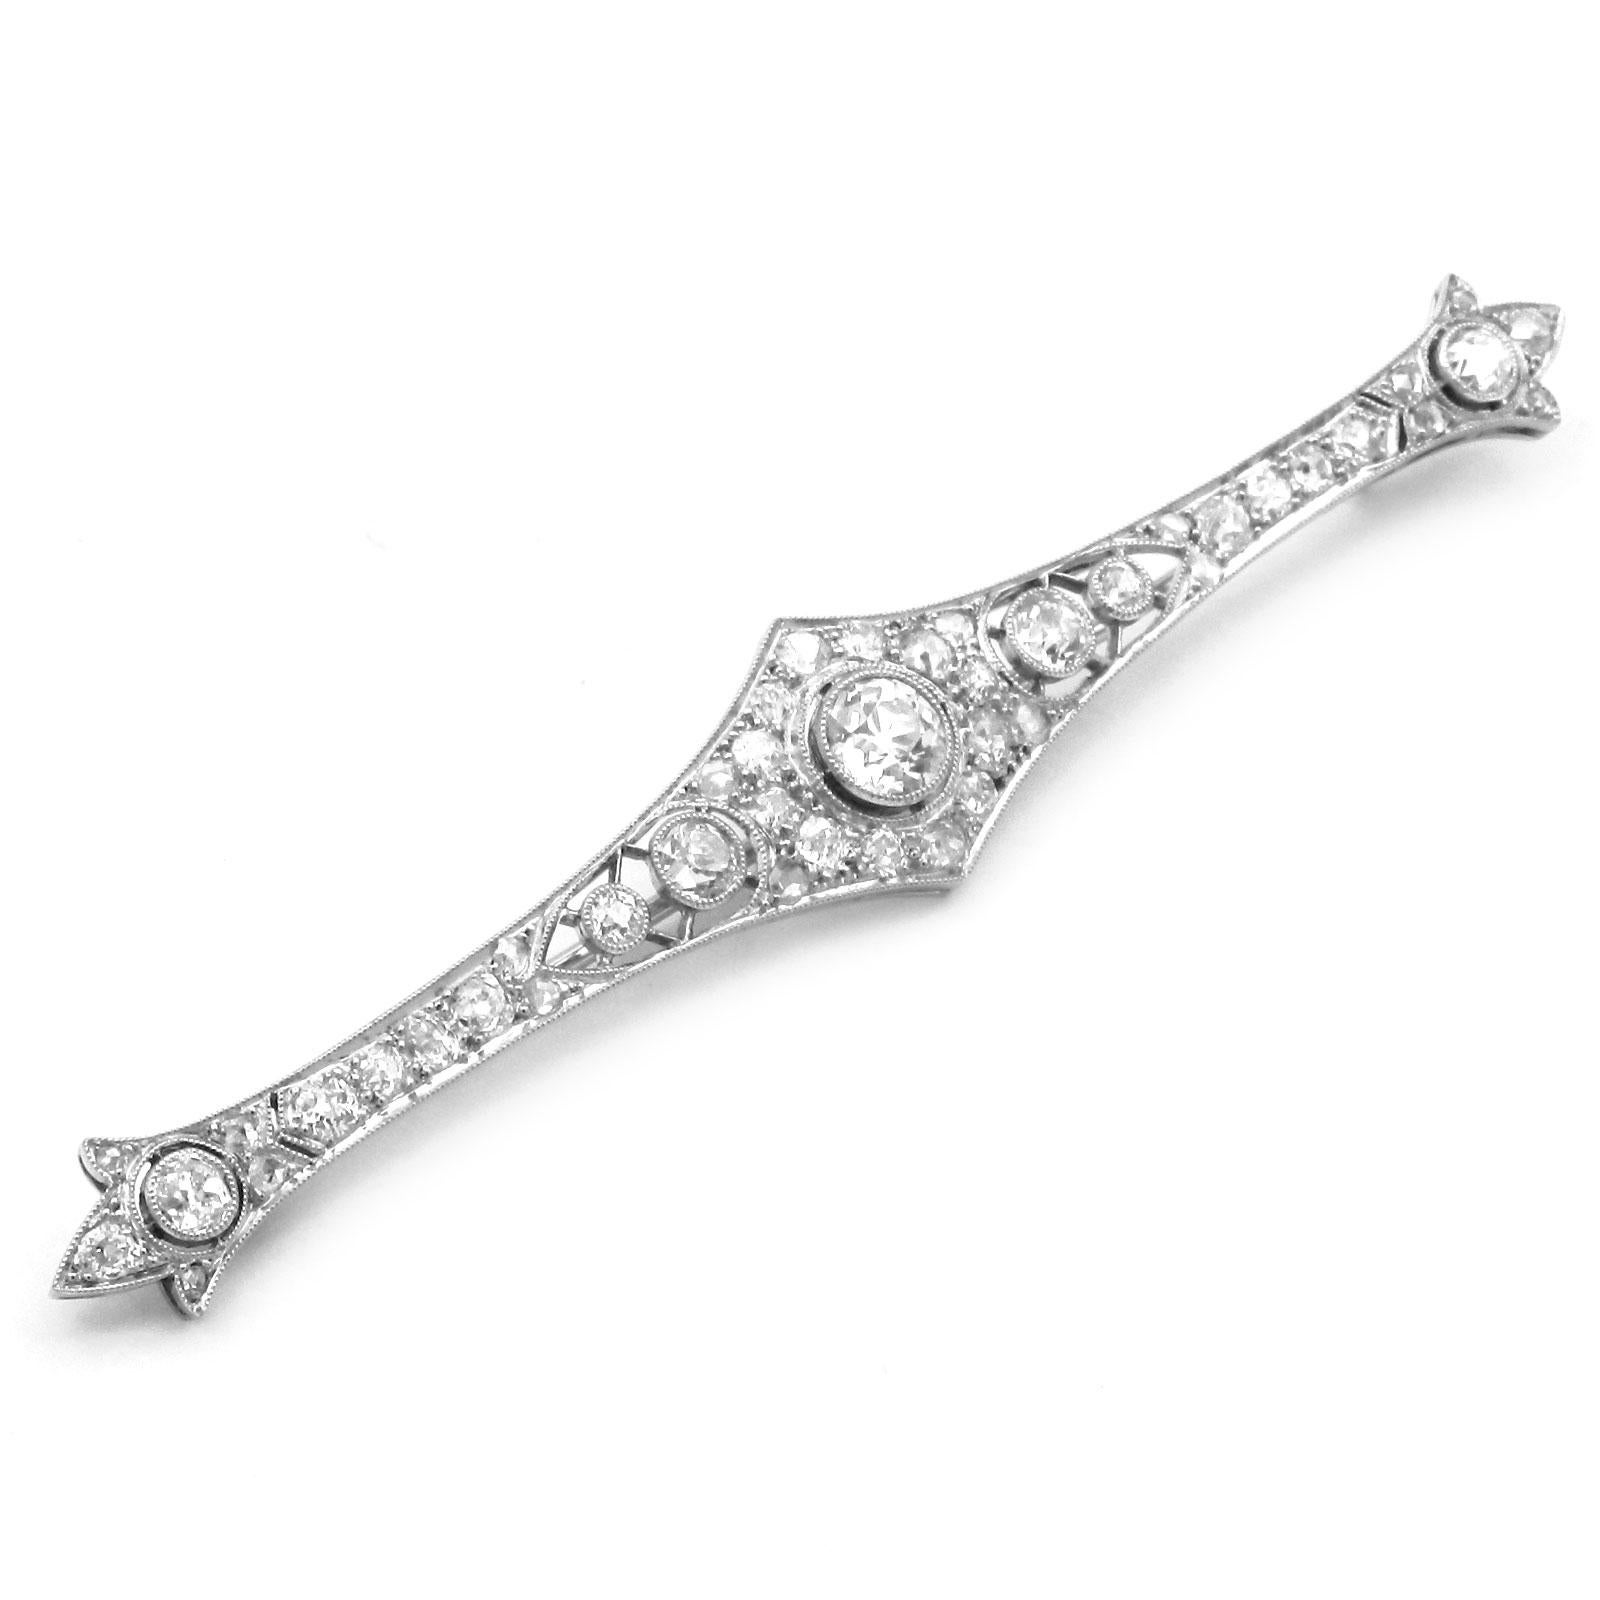 Art Deco 3.24 Carat Diamond Platinum Bar Brooch circa 1930

Very decorative 3.24 carat diamond bar brooch made of platinum in the form of an elongated pin, geometrically designed and pierced, set over the entire length with a total of 45 radiant